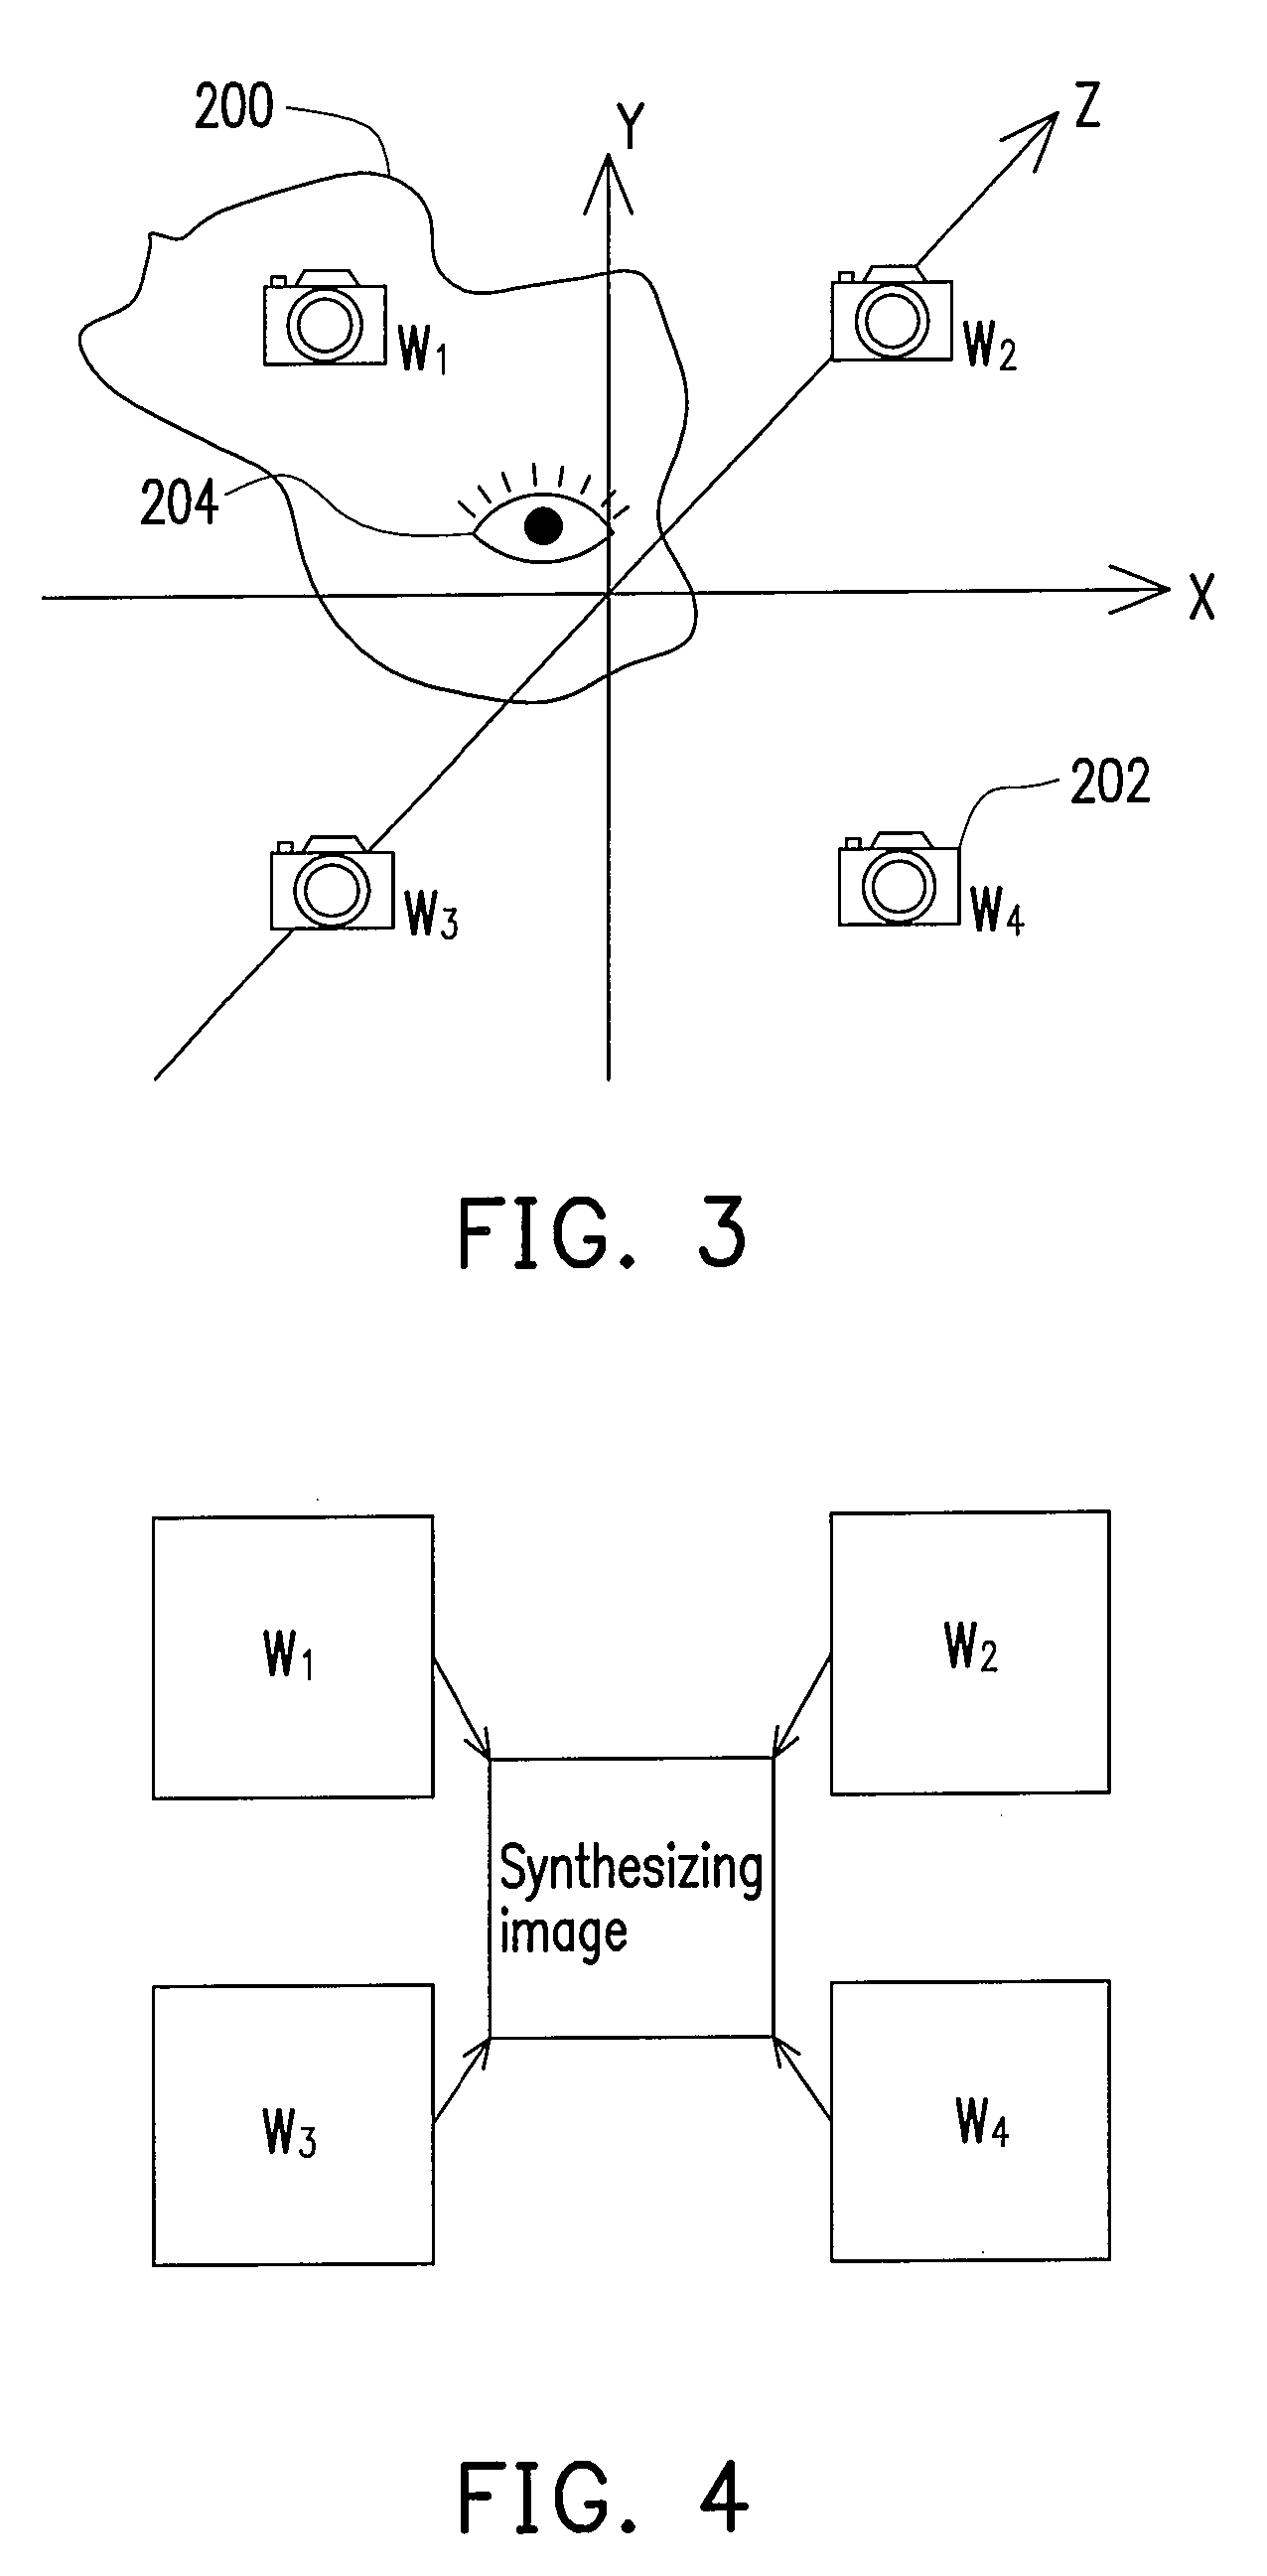 Parallel processing method for synthesizing an image with multi-view images